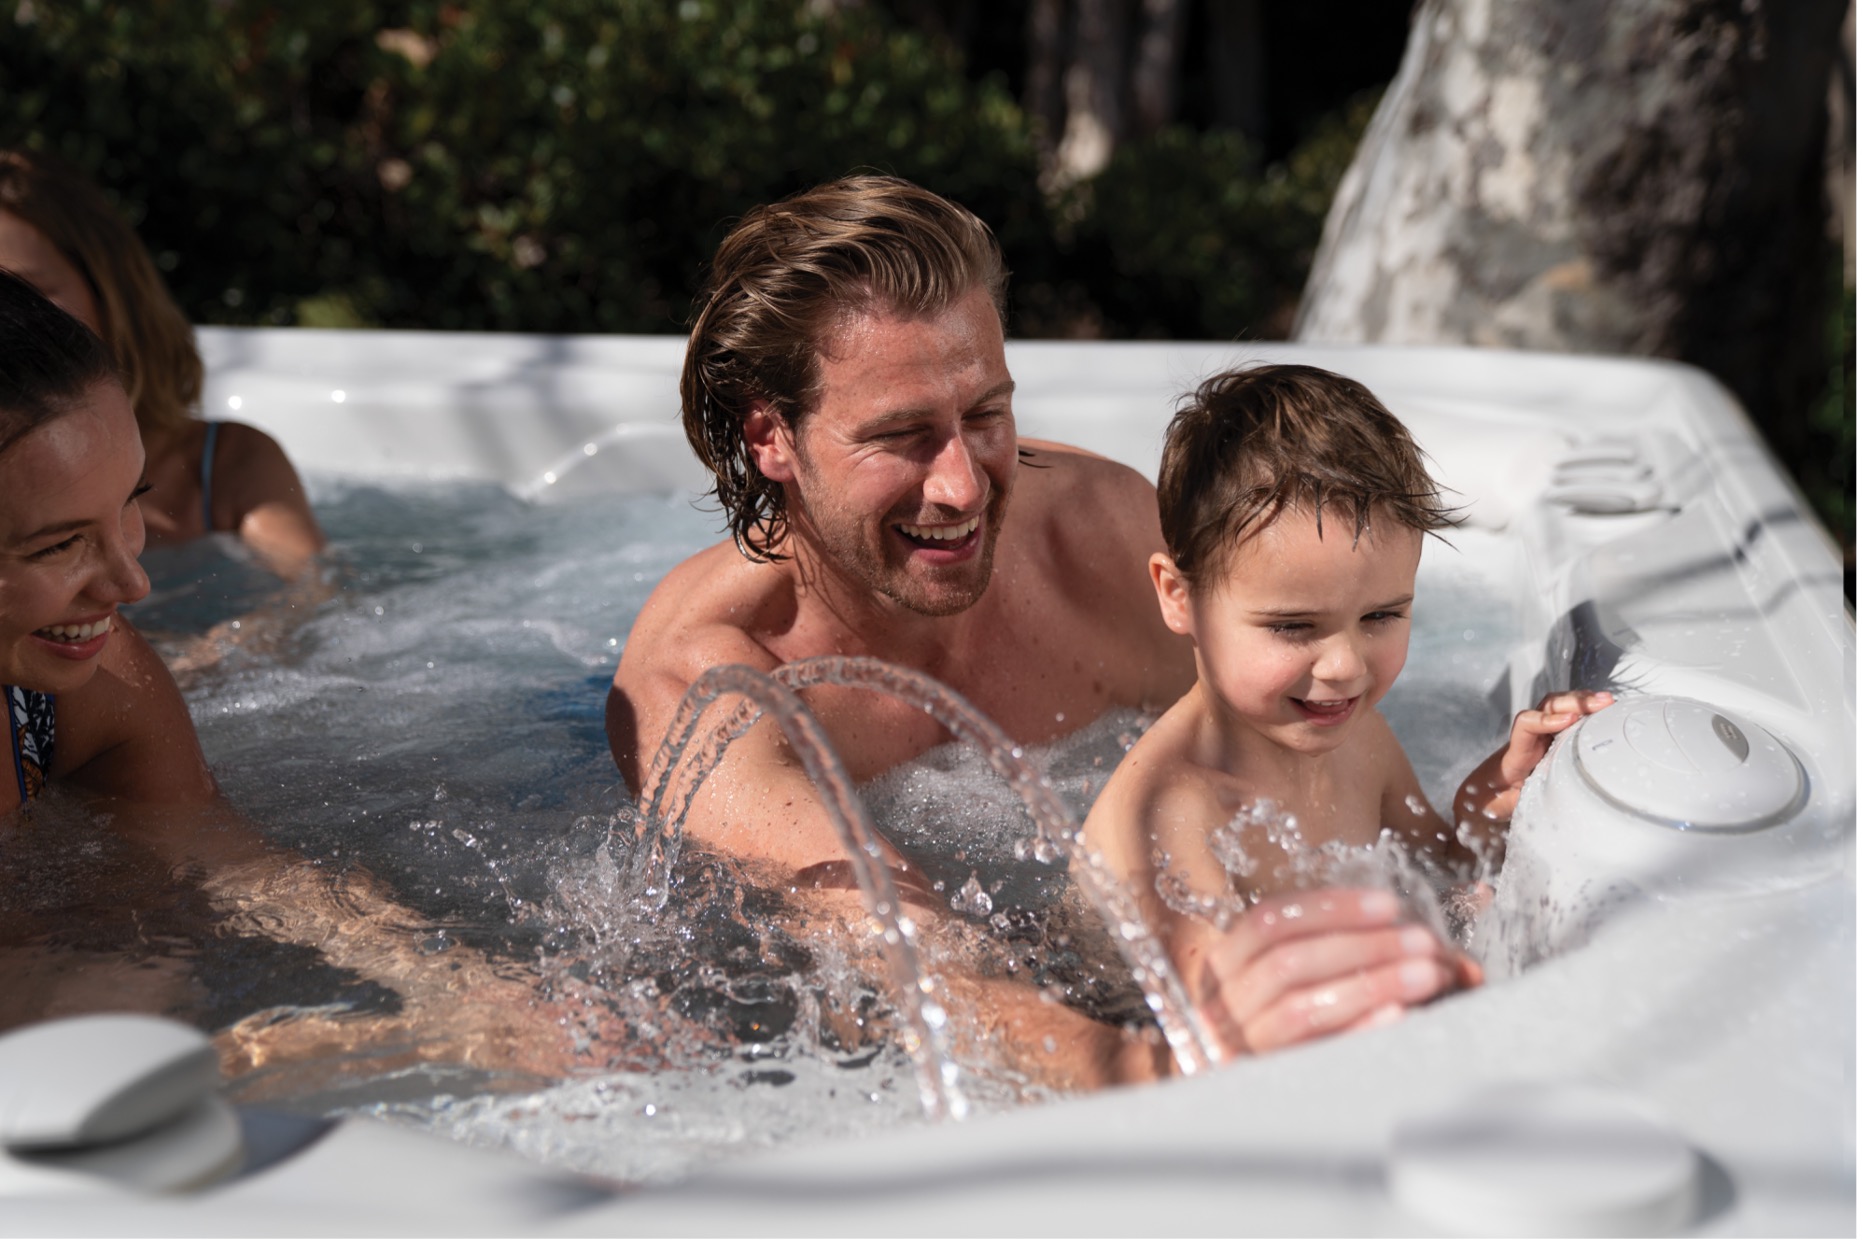 The Top 5 Reasons to Buy Your Family a Hot Tub